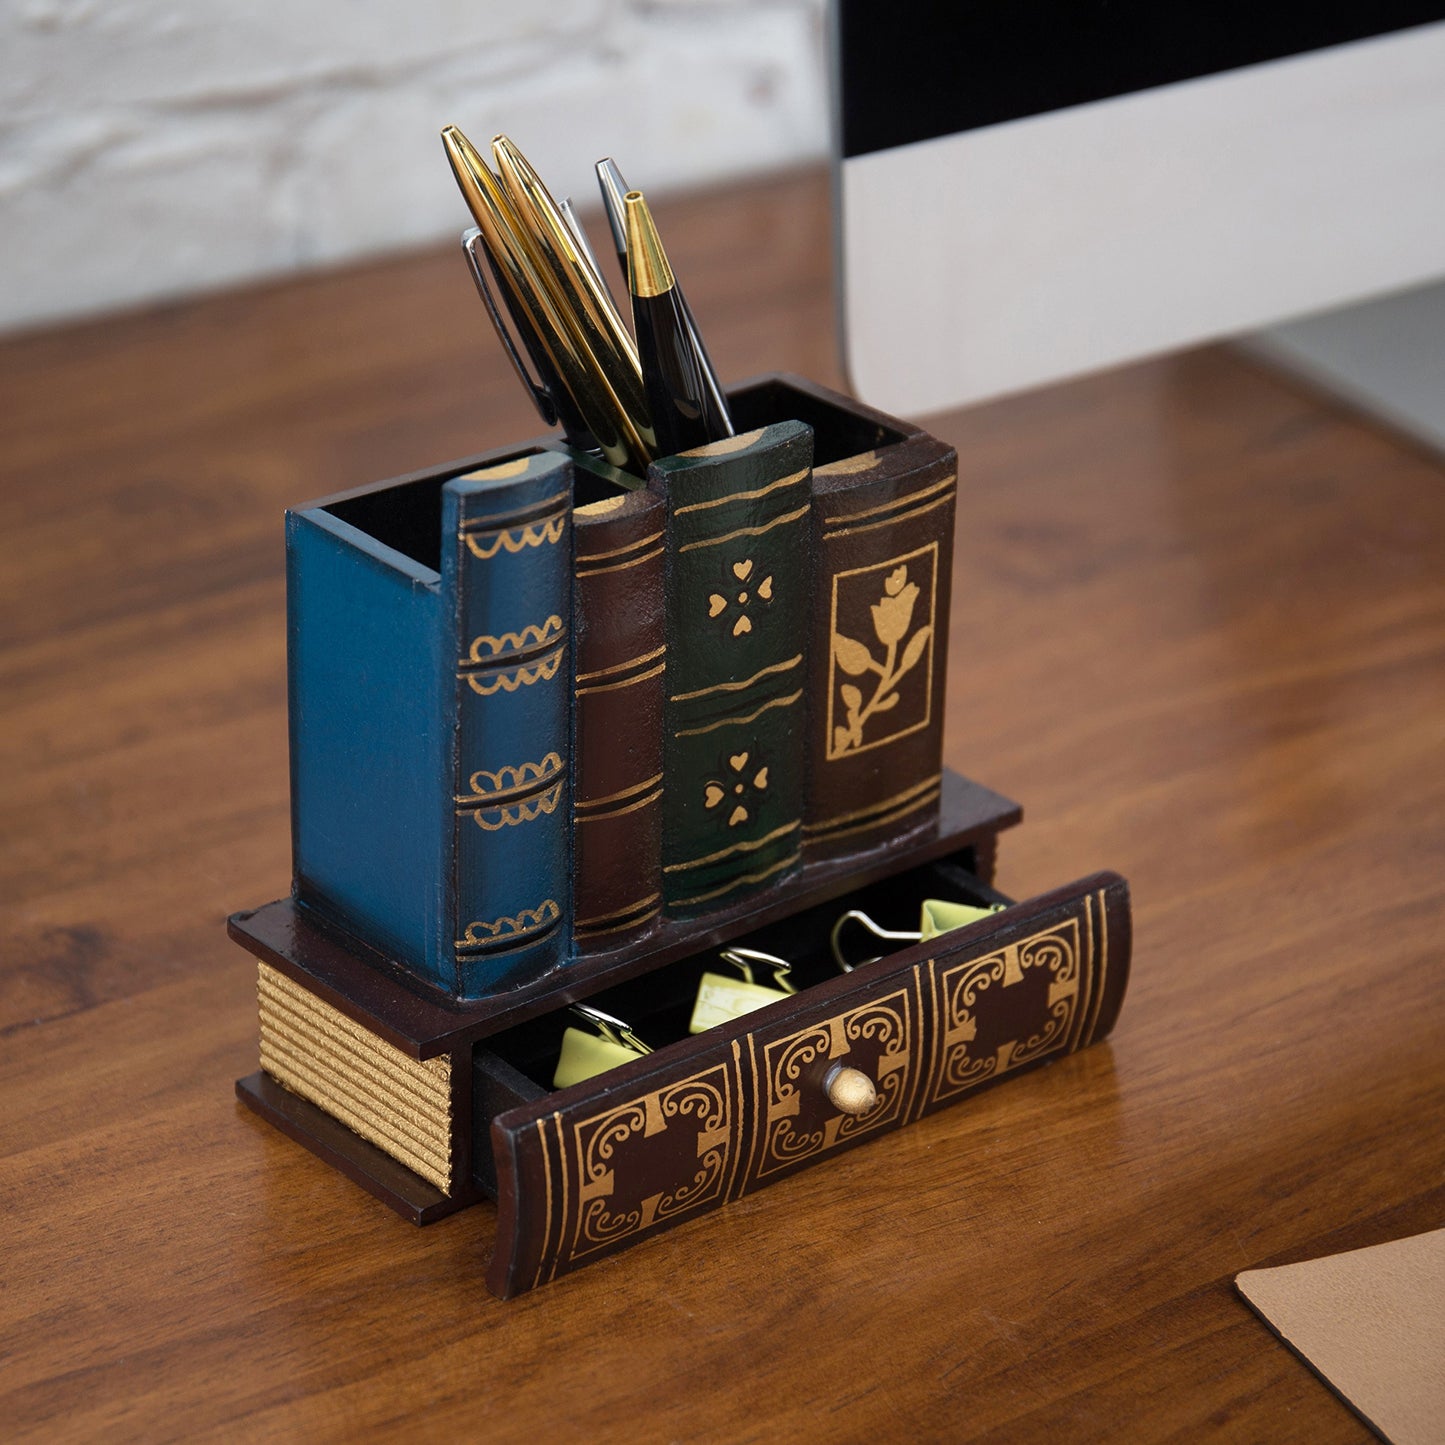 MyGift Decorative Desk Organizer Caddy, Pencil and Pen Holder with Bottom Storage Drawer and Antique Library Books Design